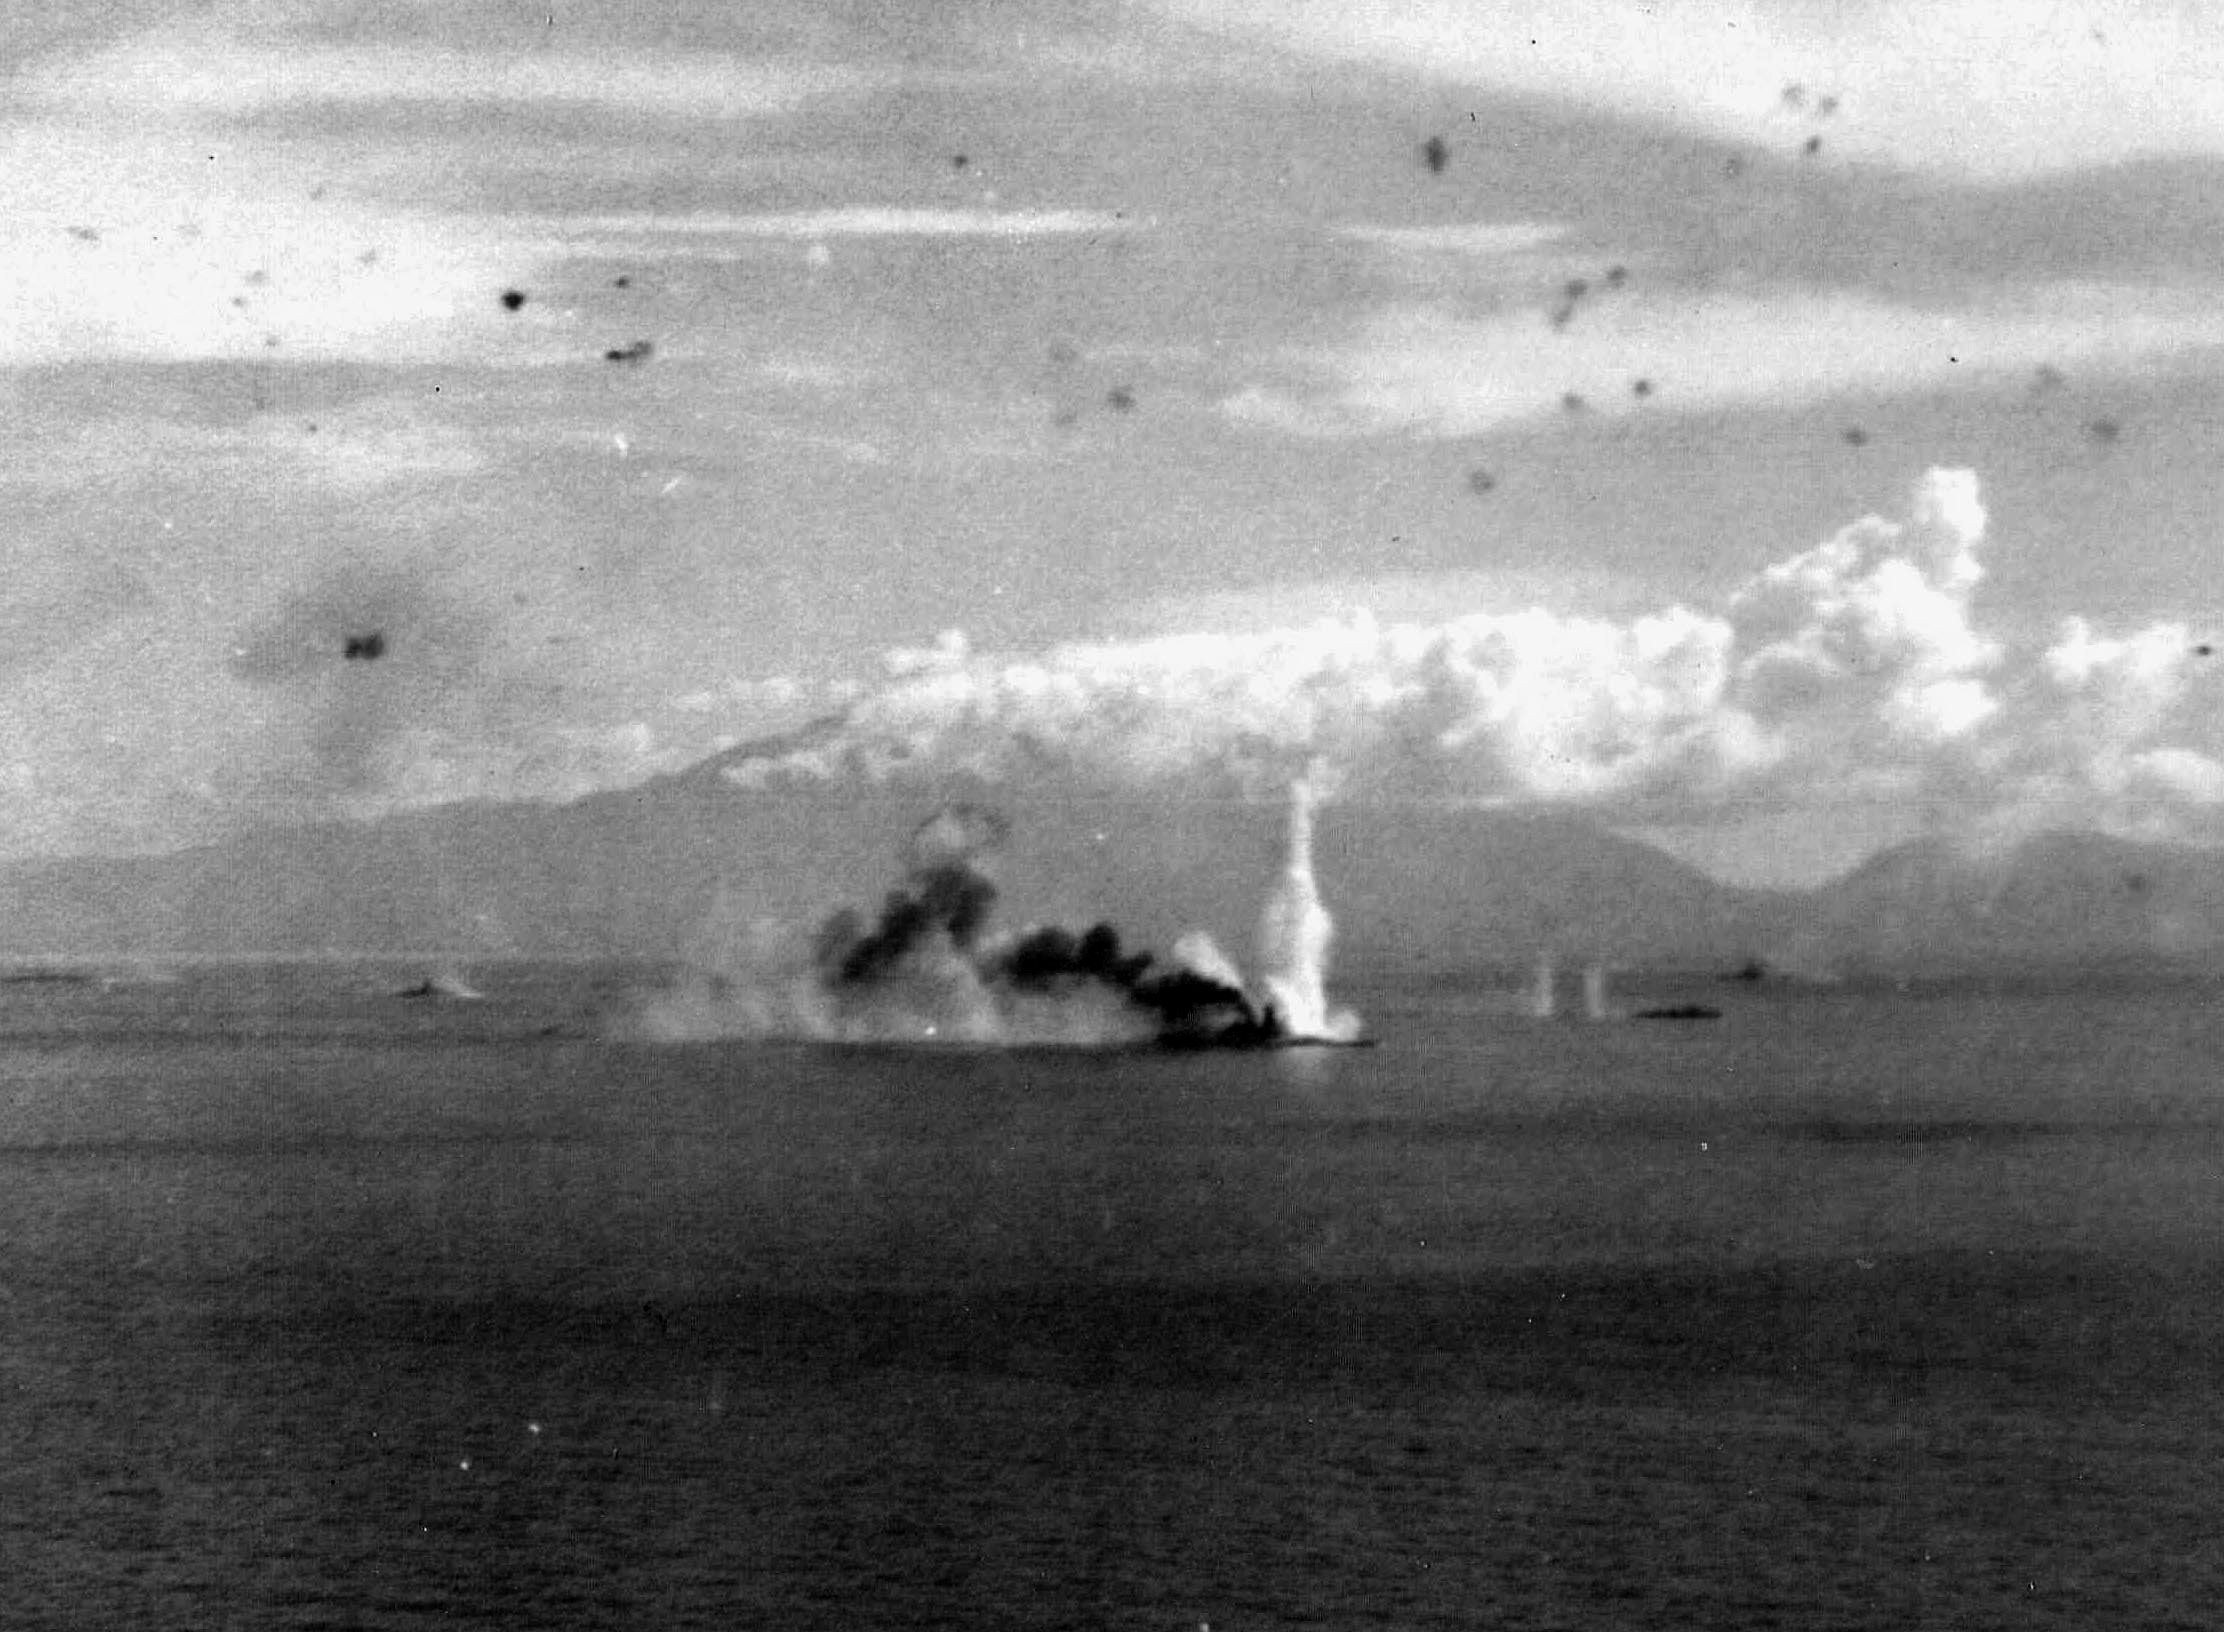 By the autumn of 1944, the Imperial Japanese Navy had been forced into a desperate gamble in Philippine waters. The Battle of Leyte Gulf is considered by many to be the largest naval battle in history. During the Leyte Gulf fight, the super battleship Musashi is relentlessly assaulted by U.S. planes in the Sibuyan Sea.